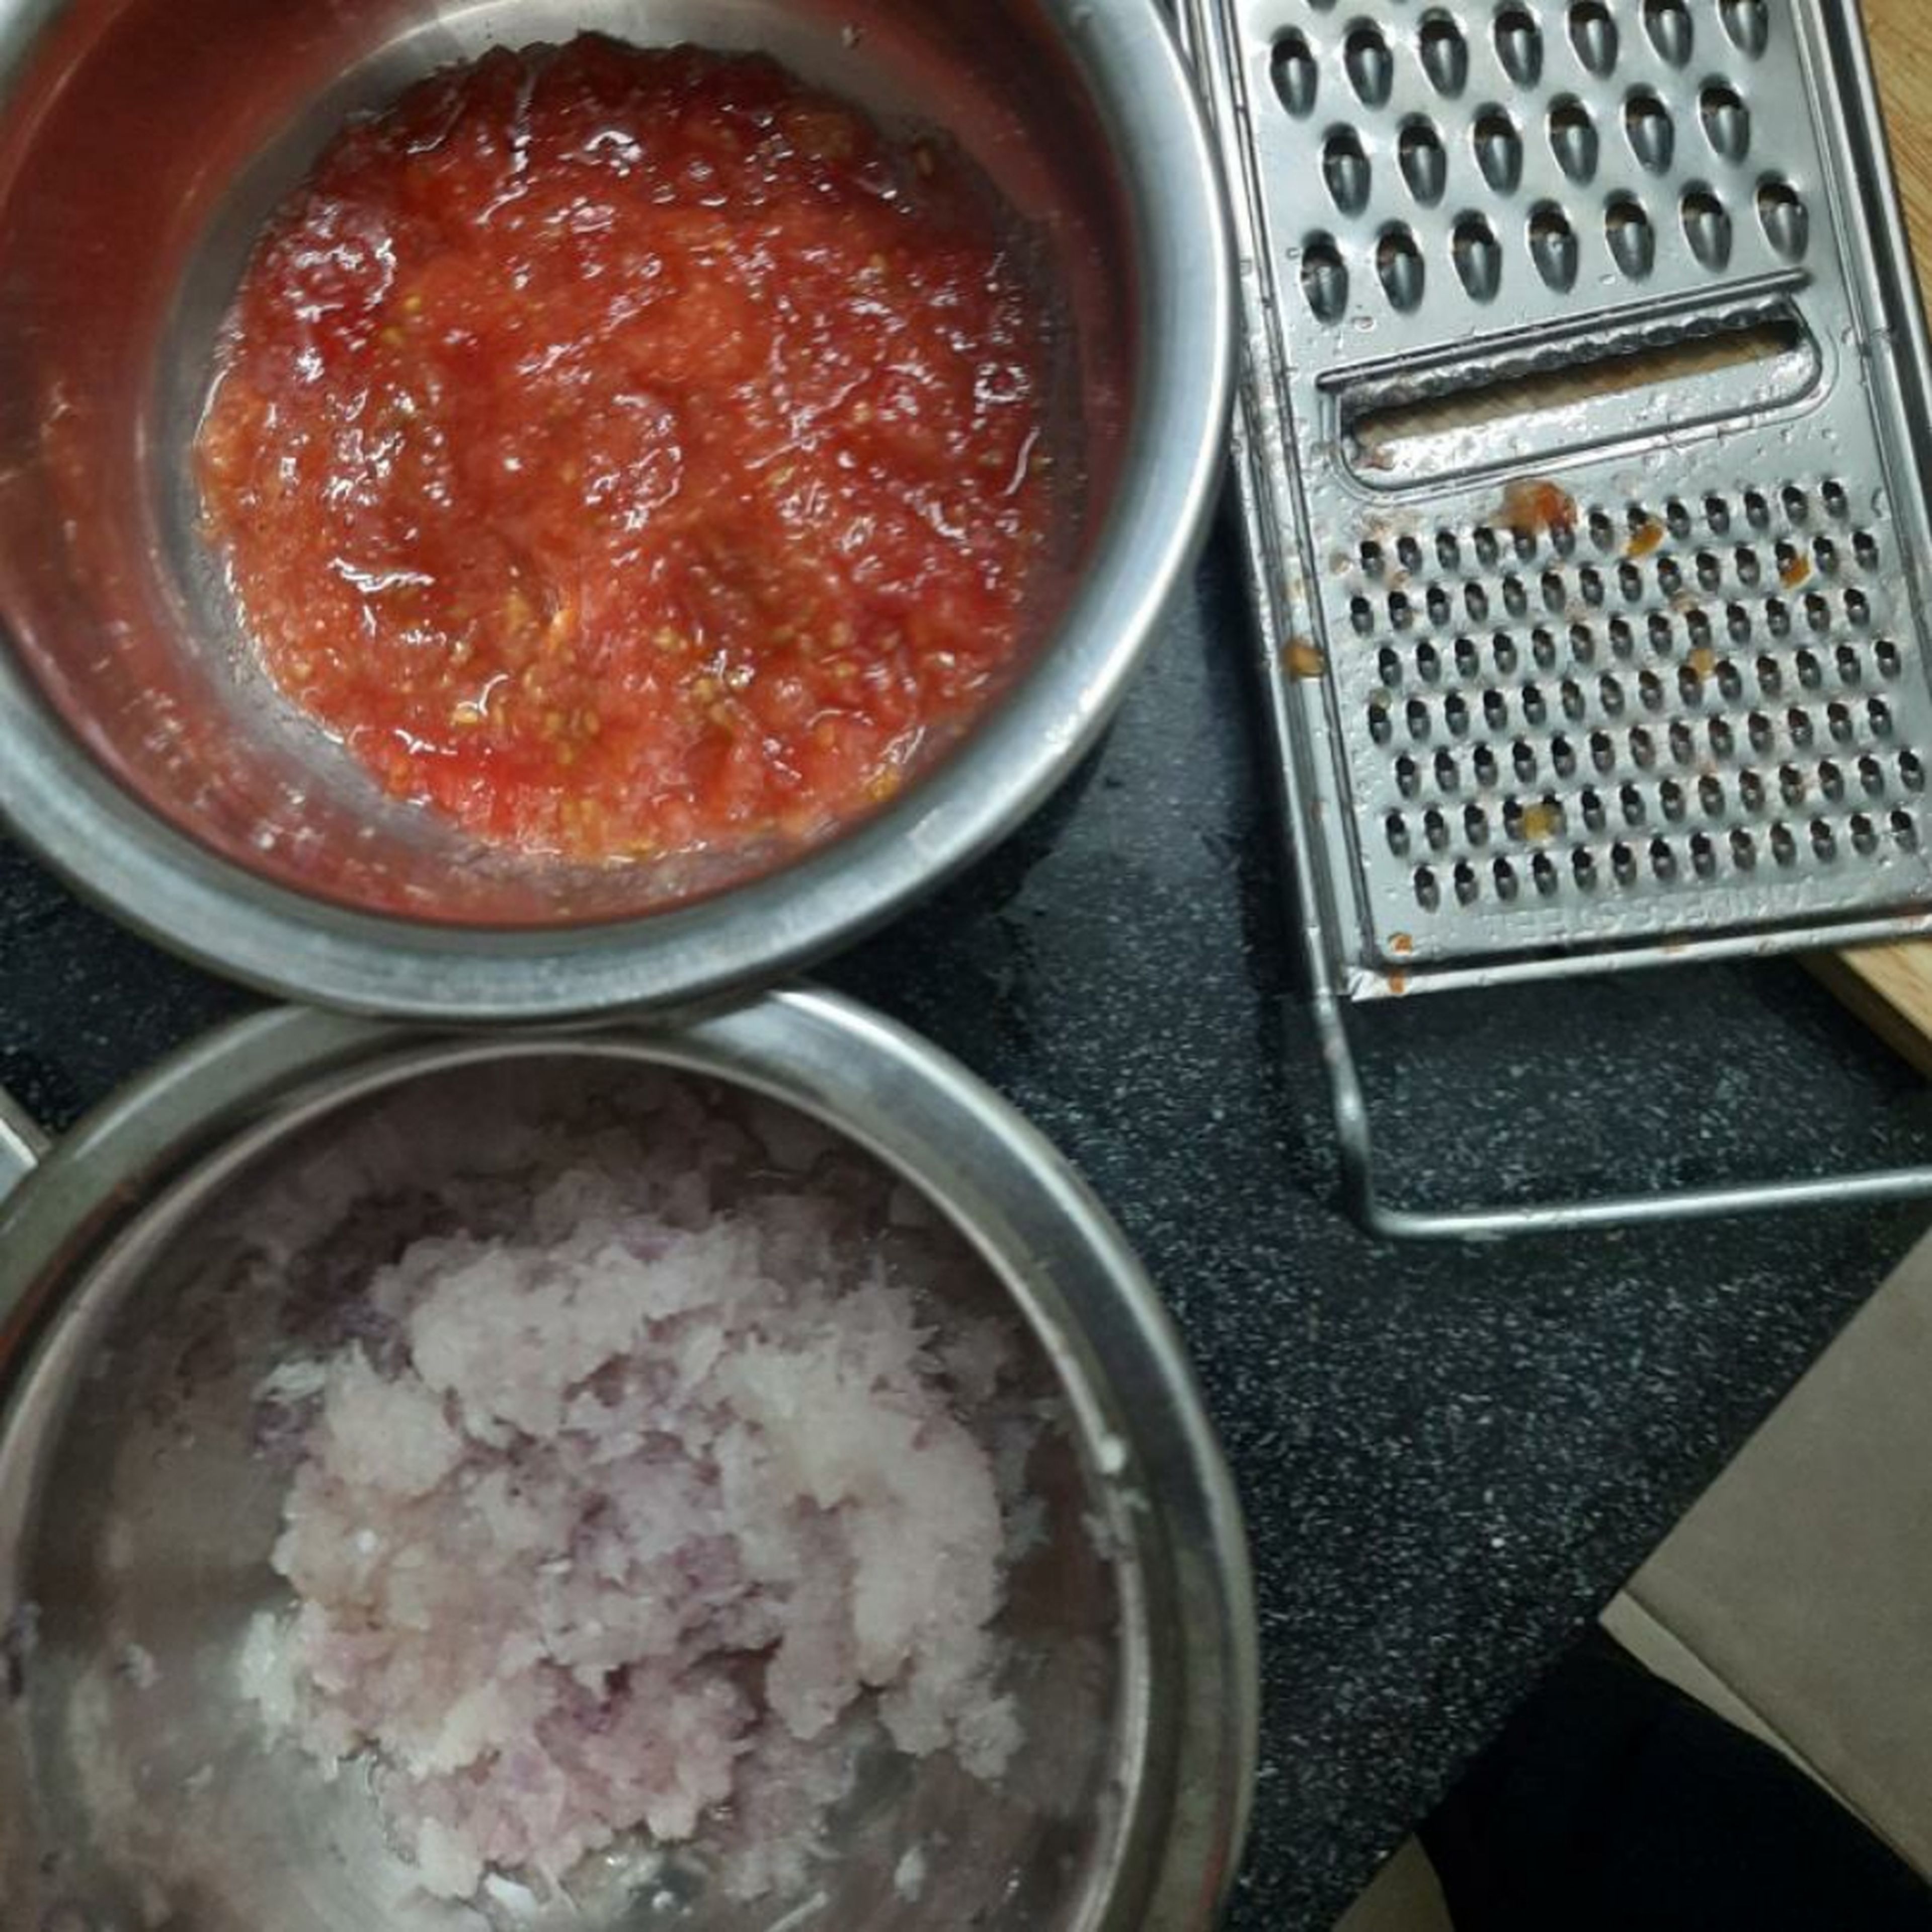 Make puree/paste from onion and tomato. If you don't have a grinder, you can simply grate the onion/tomato to get its puree.